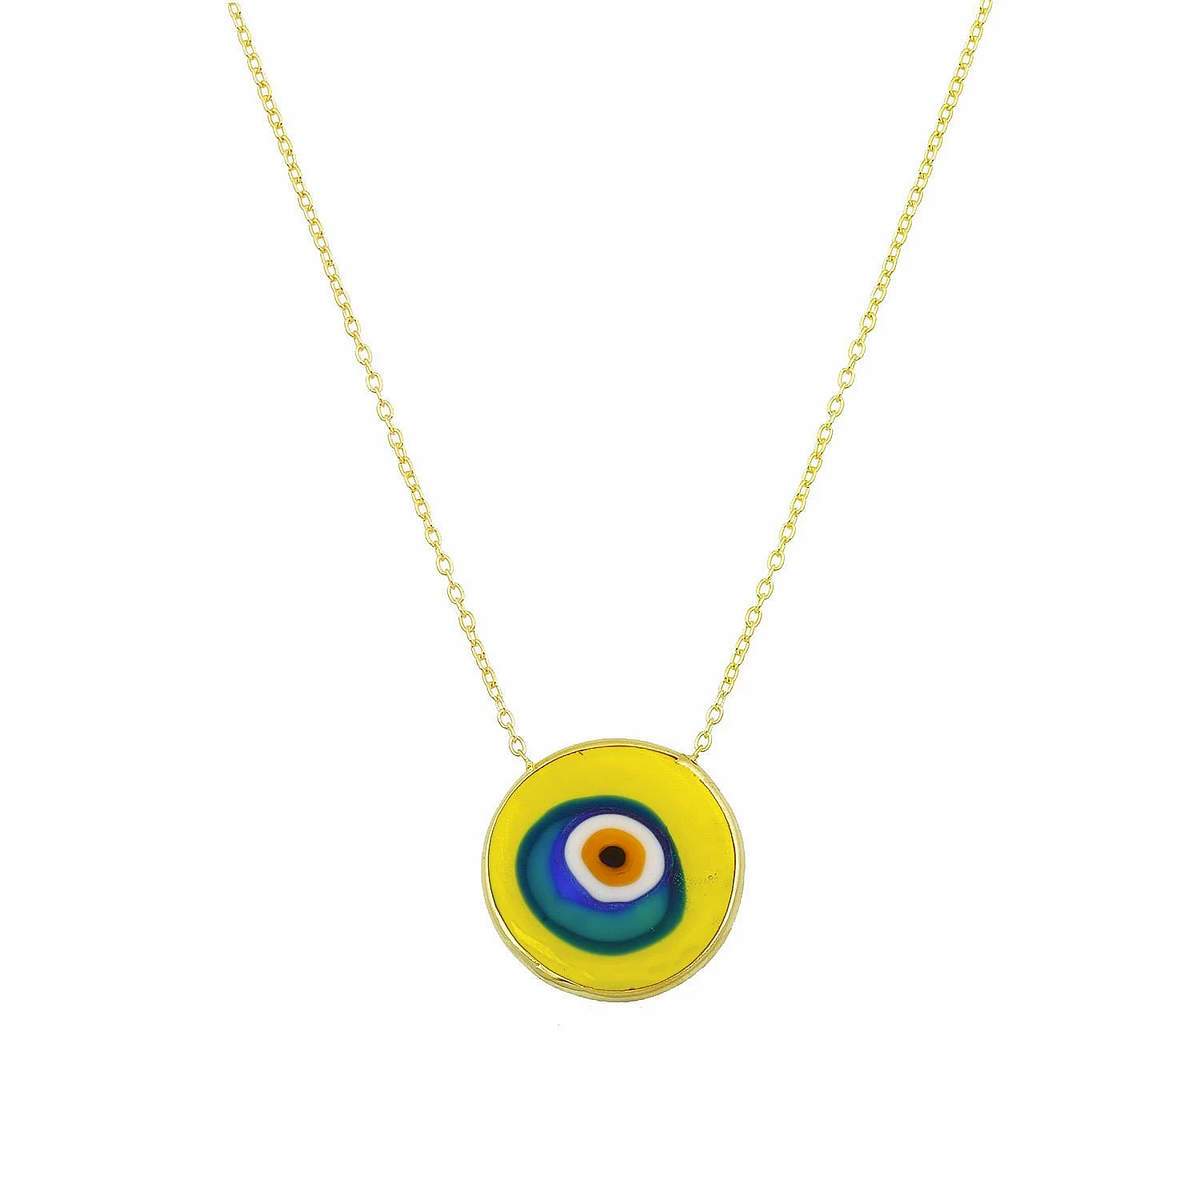 Antique Evil Eye Necklace in Yellow